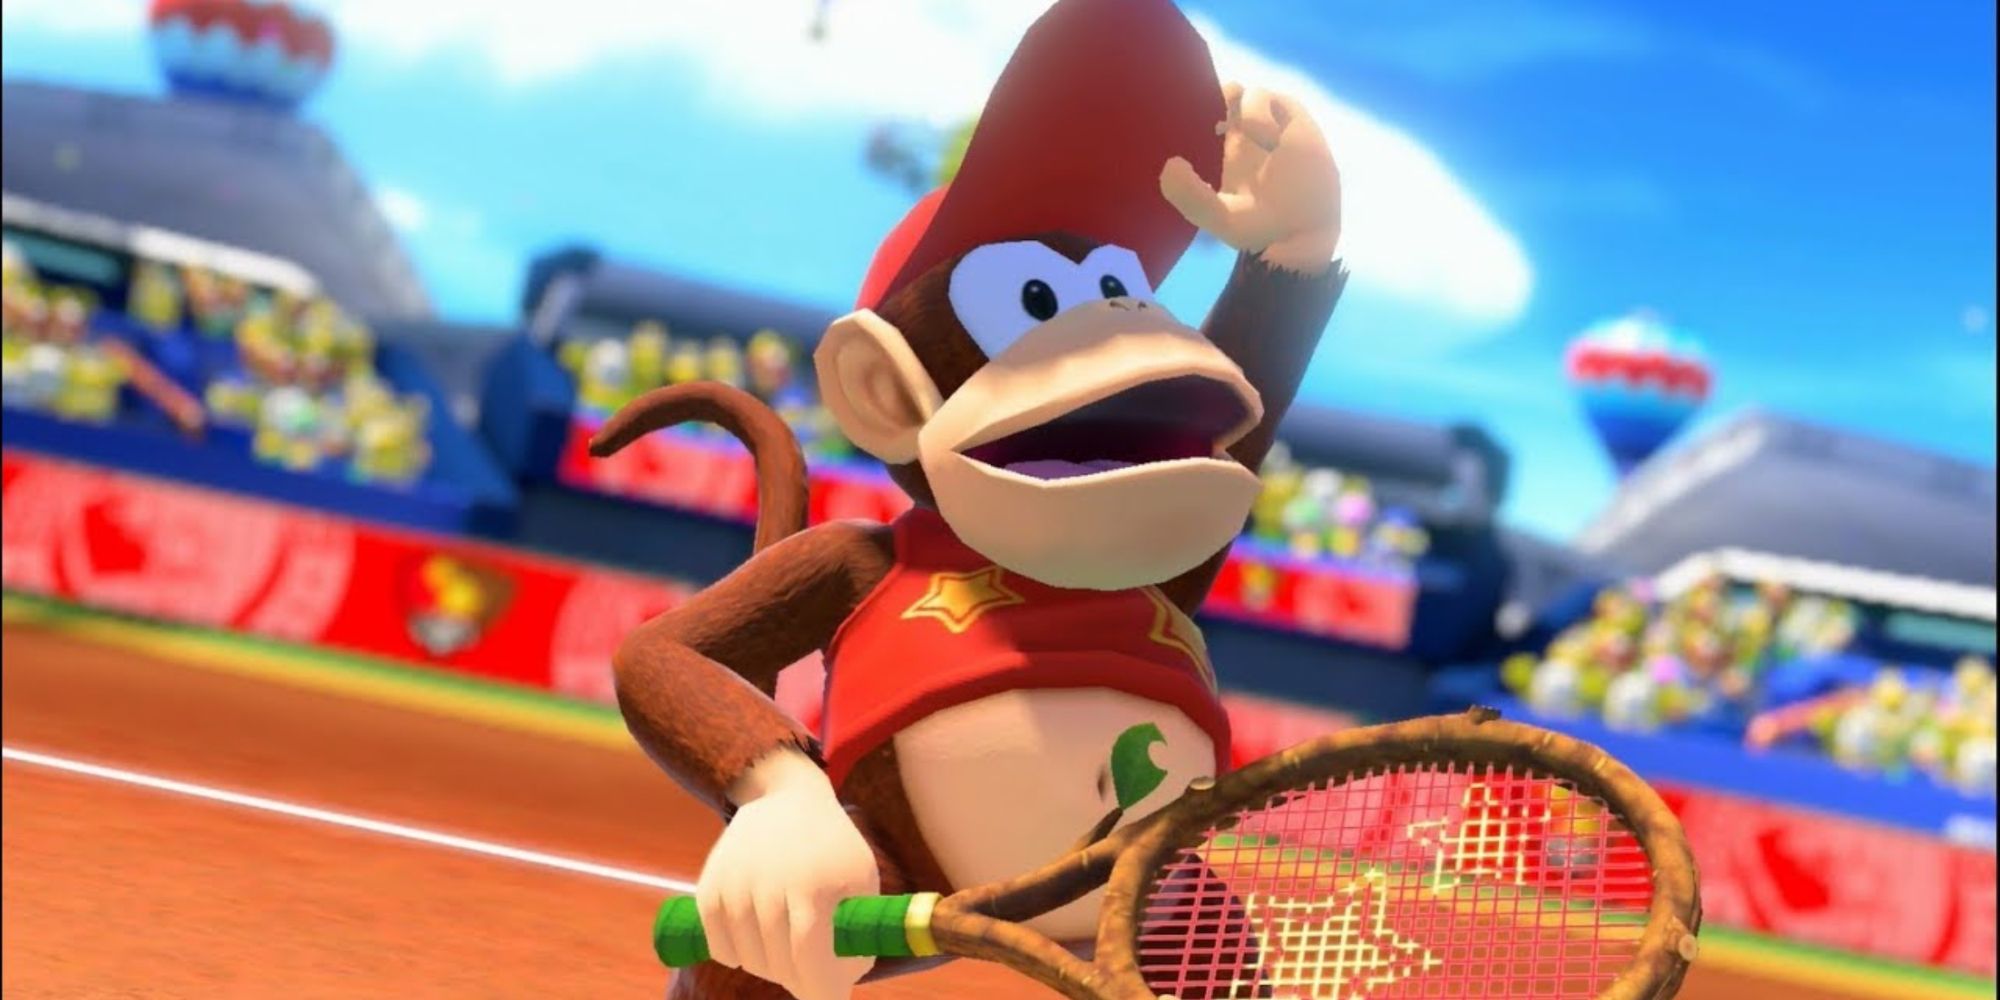 Diddy Kong Holding A Tennis Racket While Looking At The Camera